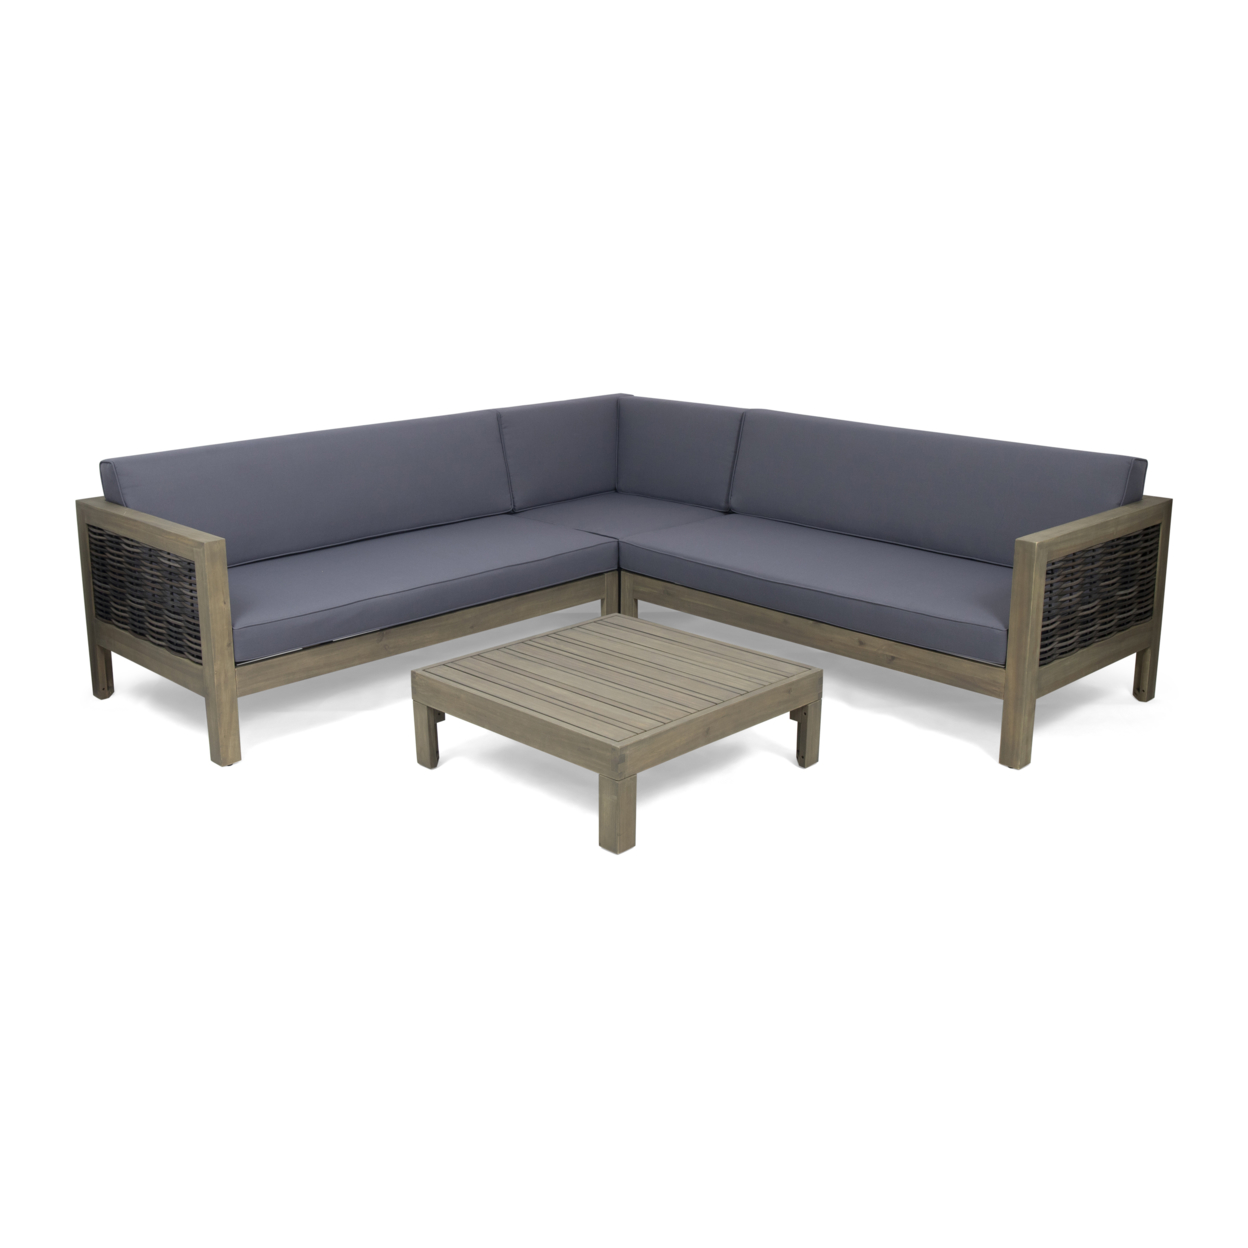 Elizabeth Outdoor Wood And Wicker 5 Seater Sectional Sofa And Coffee Table Set - Gray, Mixed Brown, Dark Gray